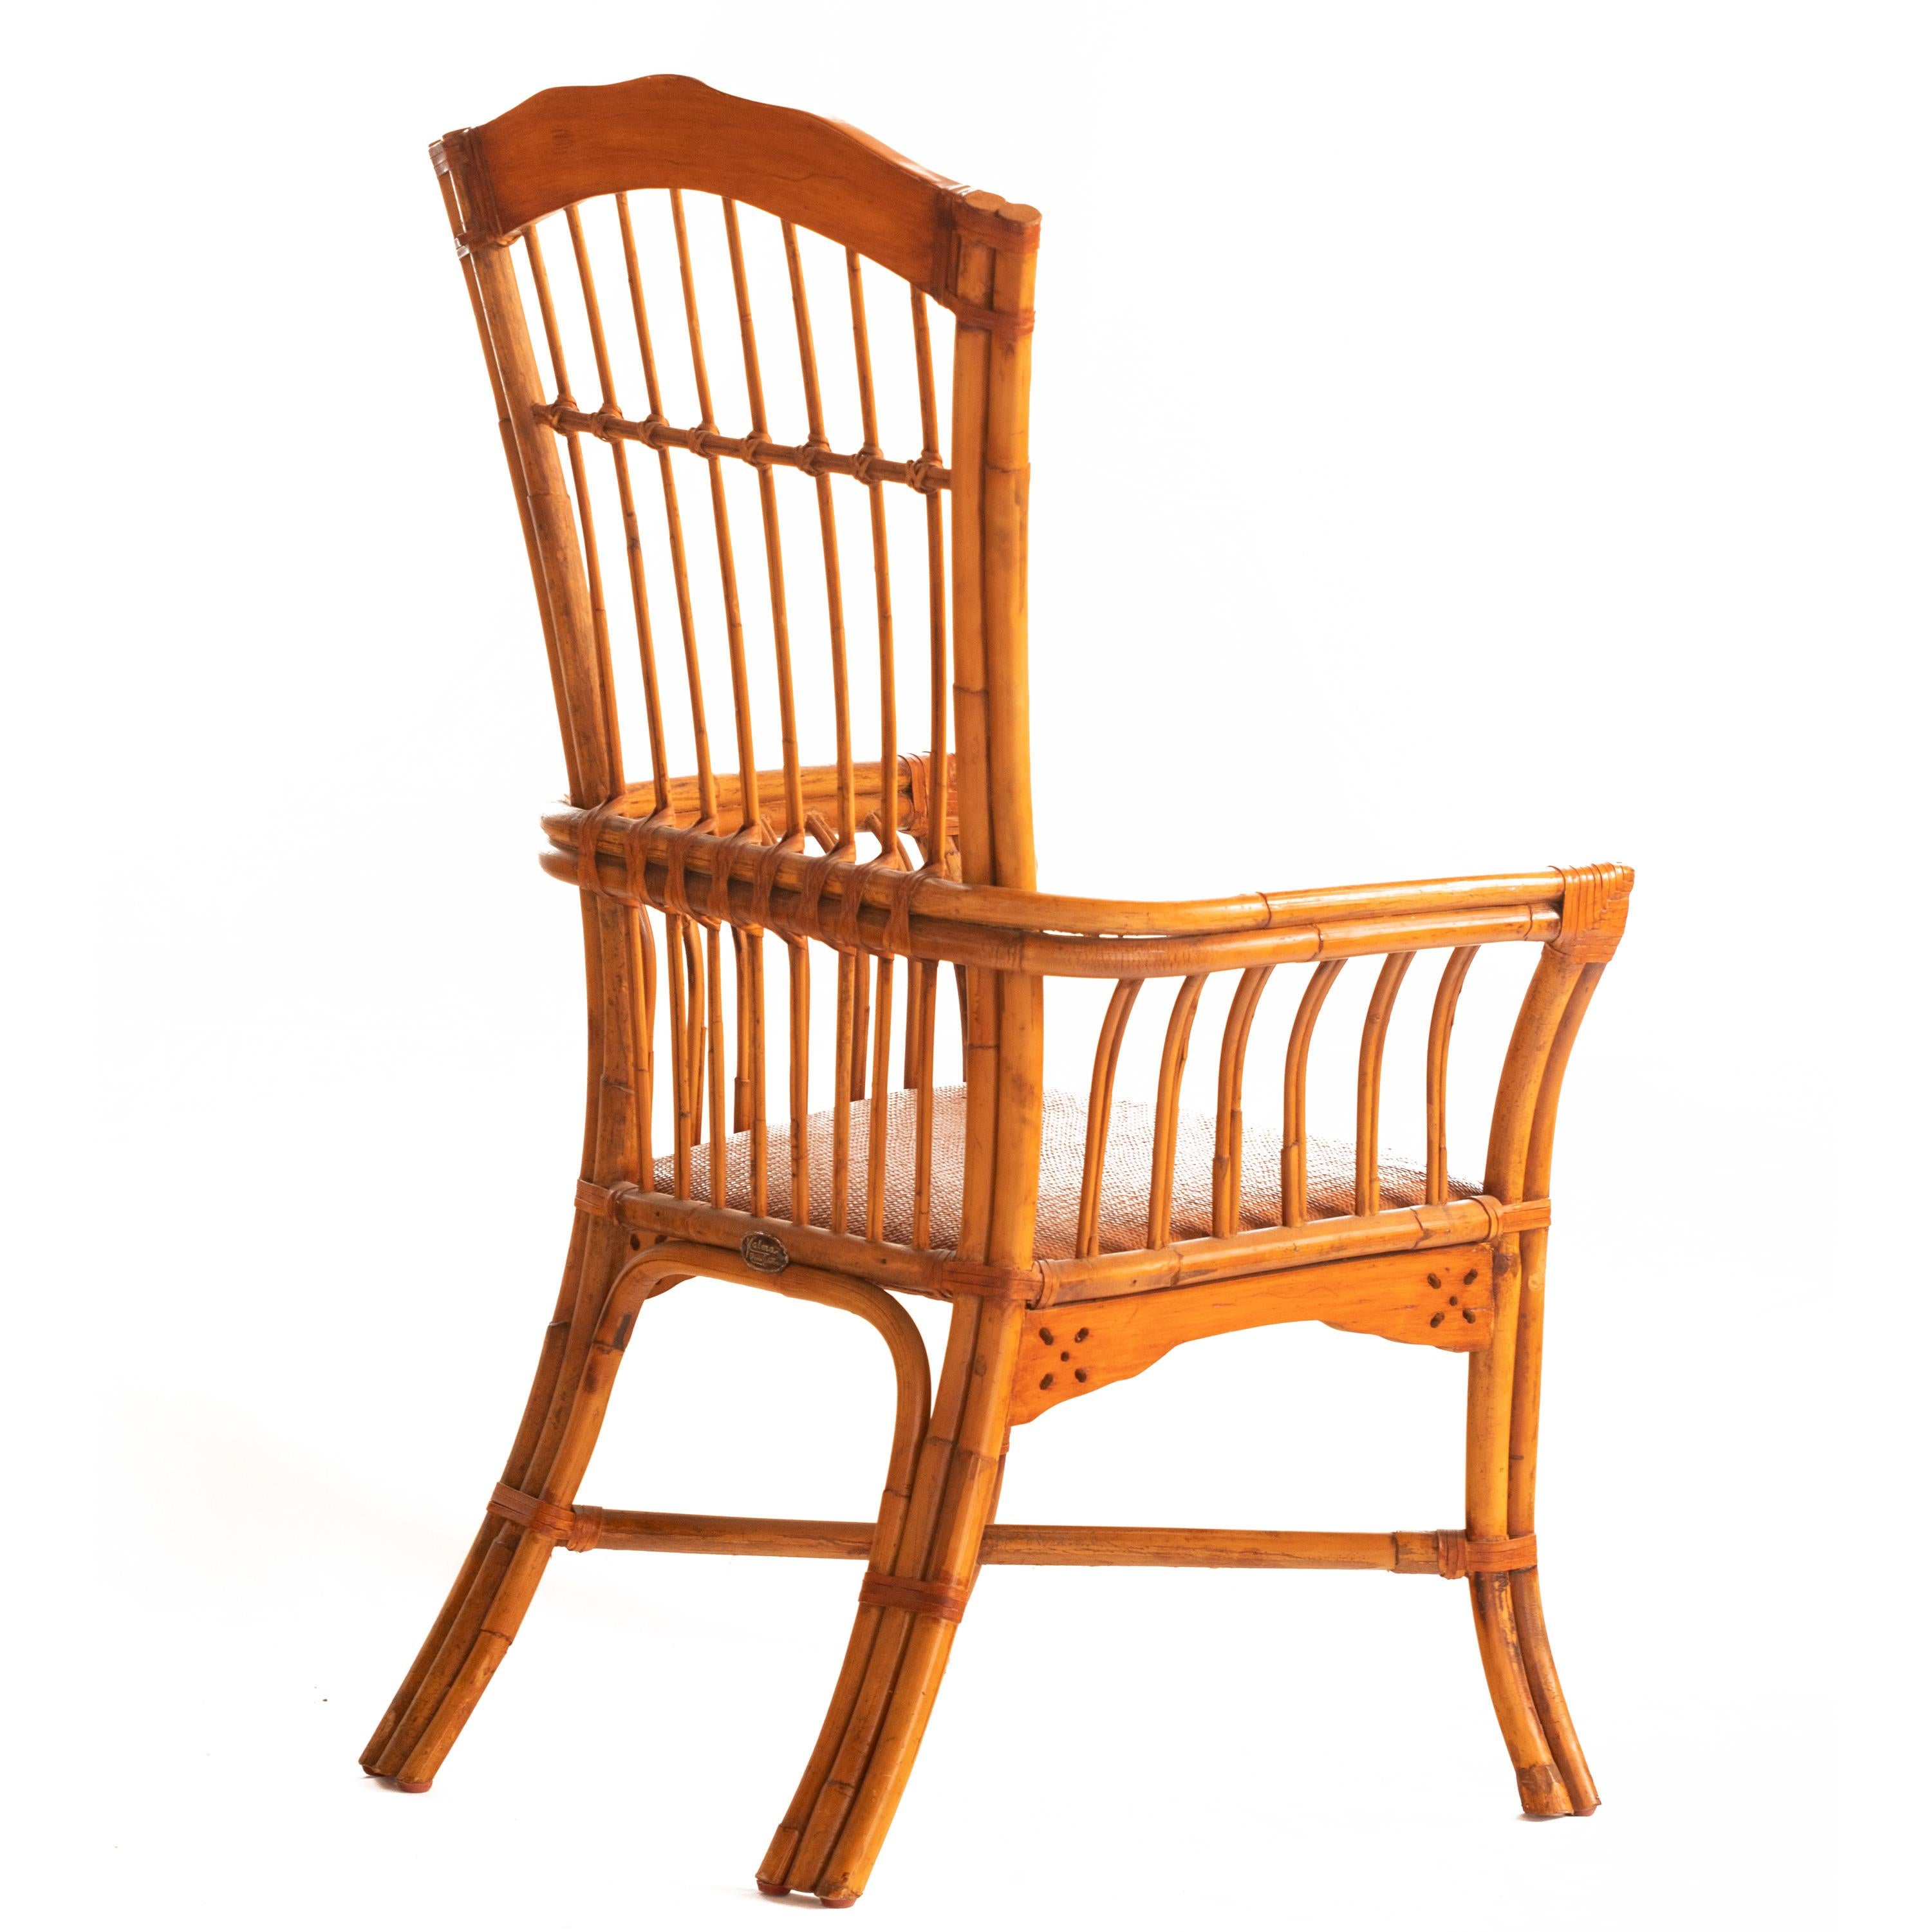 Hand-Carved Rattan Woven Cane Handmade Seat Armchair Kalma Modern Confortable Furniture For Sale